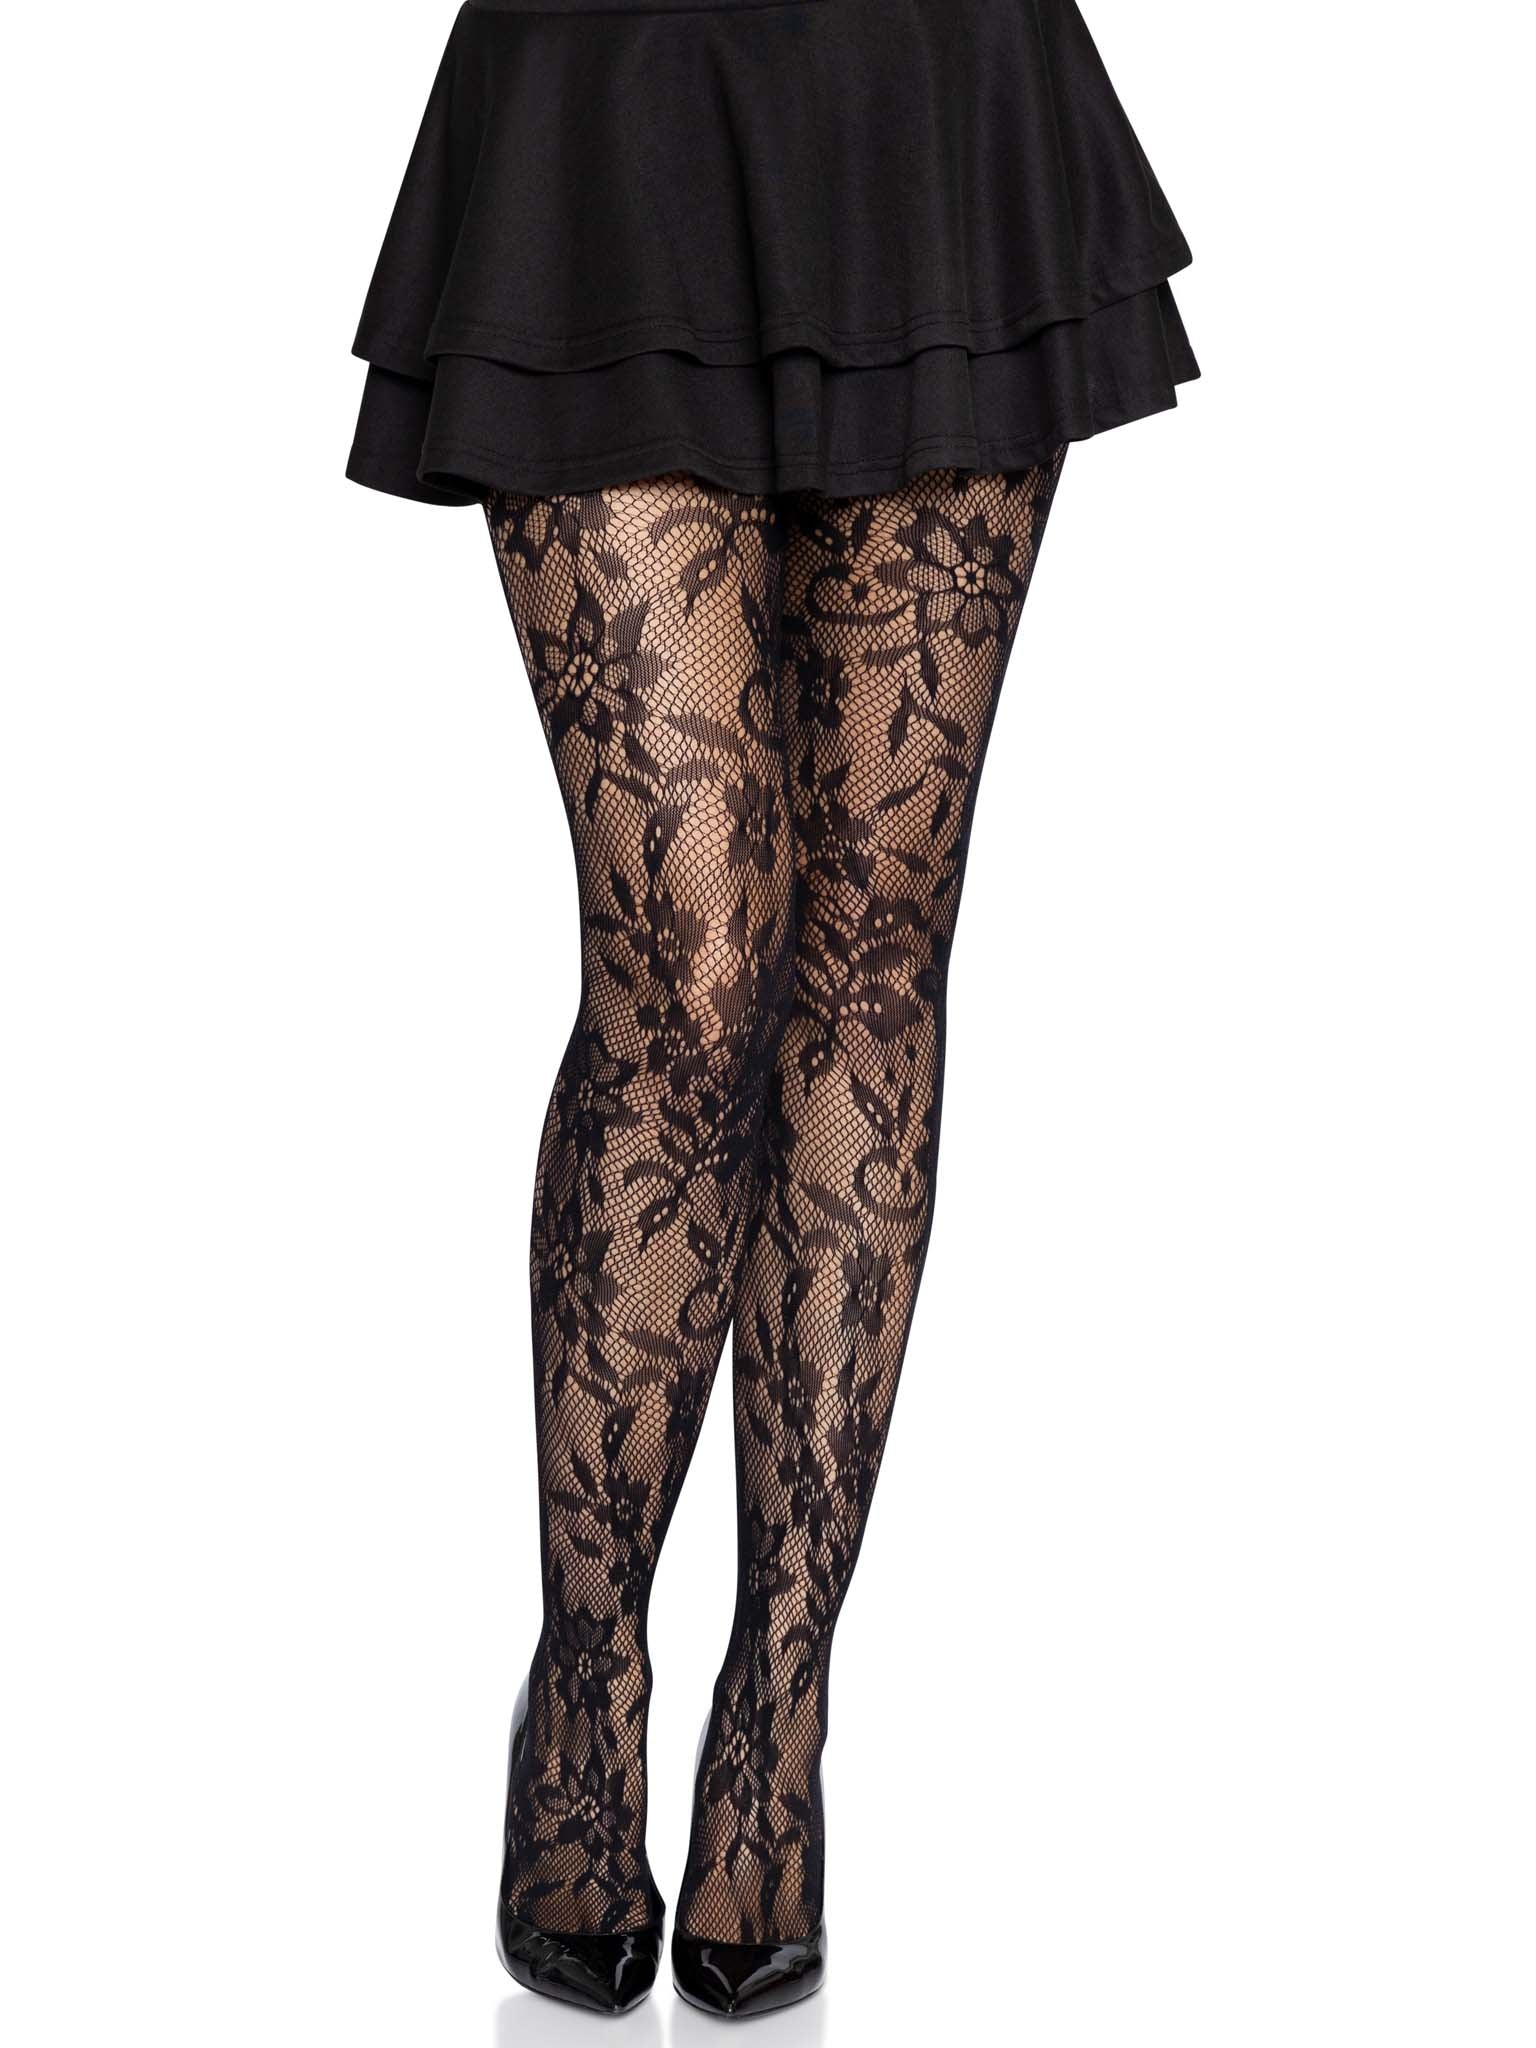 Mesh tights with floral lace, Lingerie